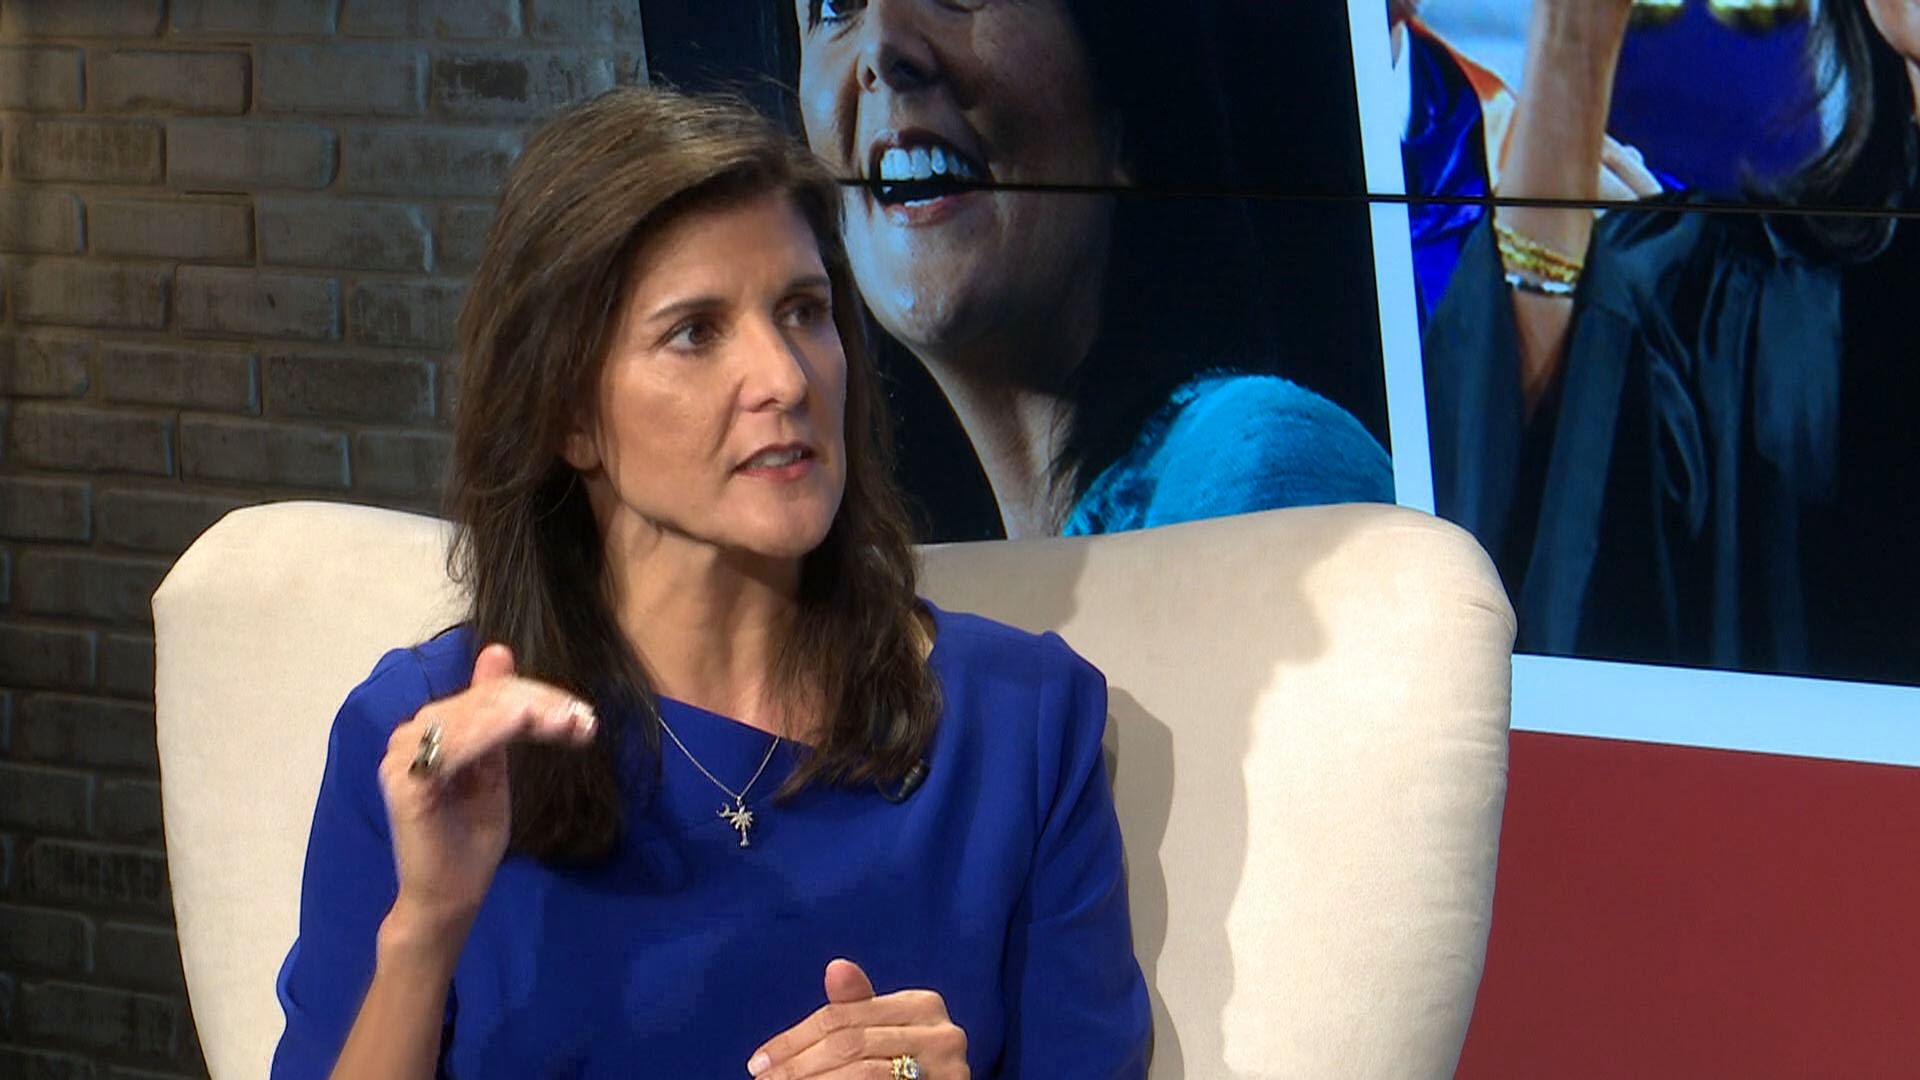 Republican Presidential candidate Nikki Haley spoke to News19's Andrea Mock about her campaign for president and her vision for America.